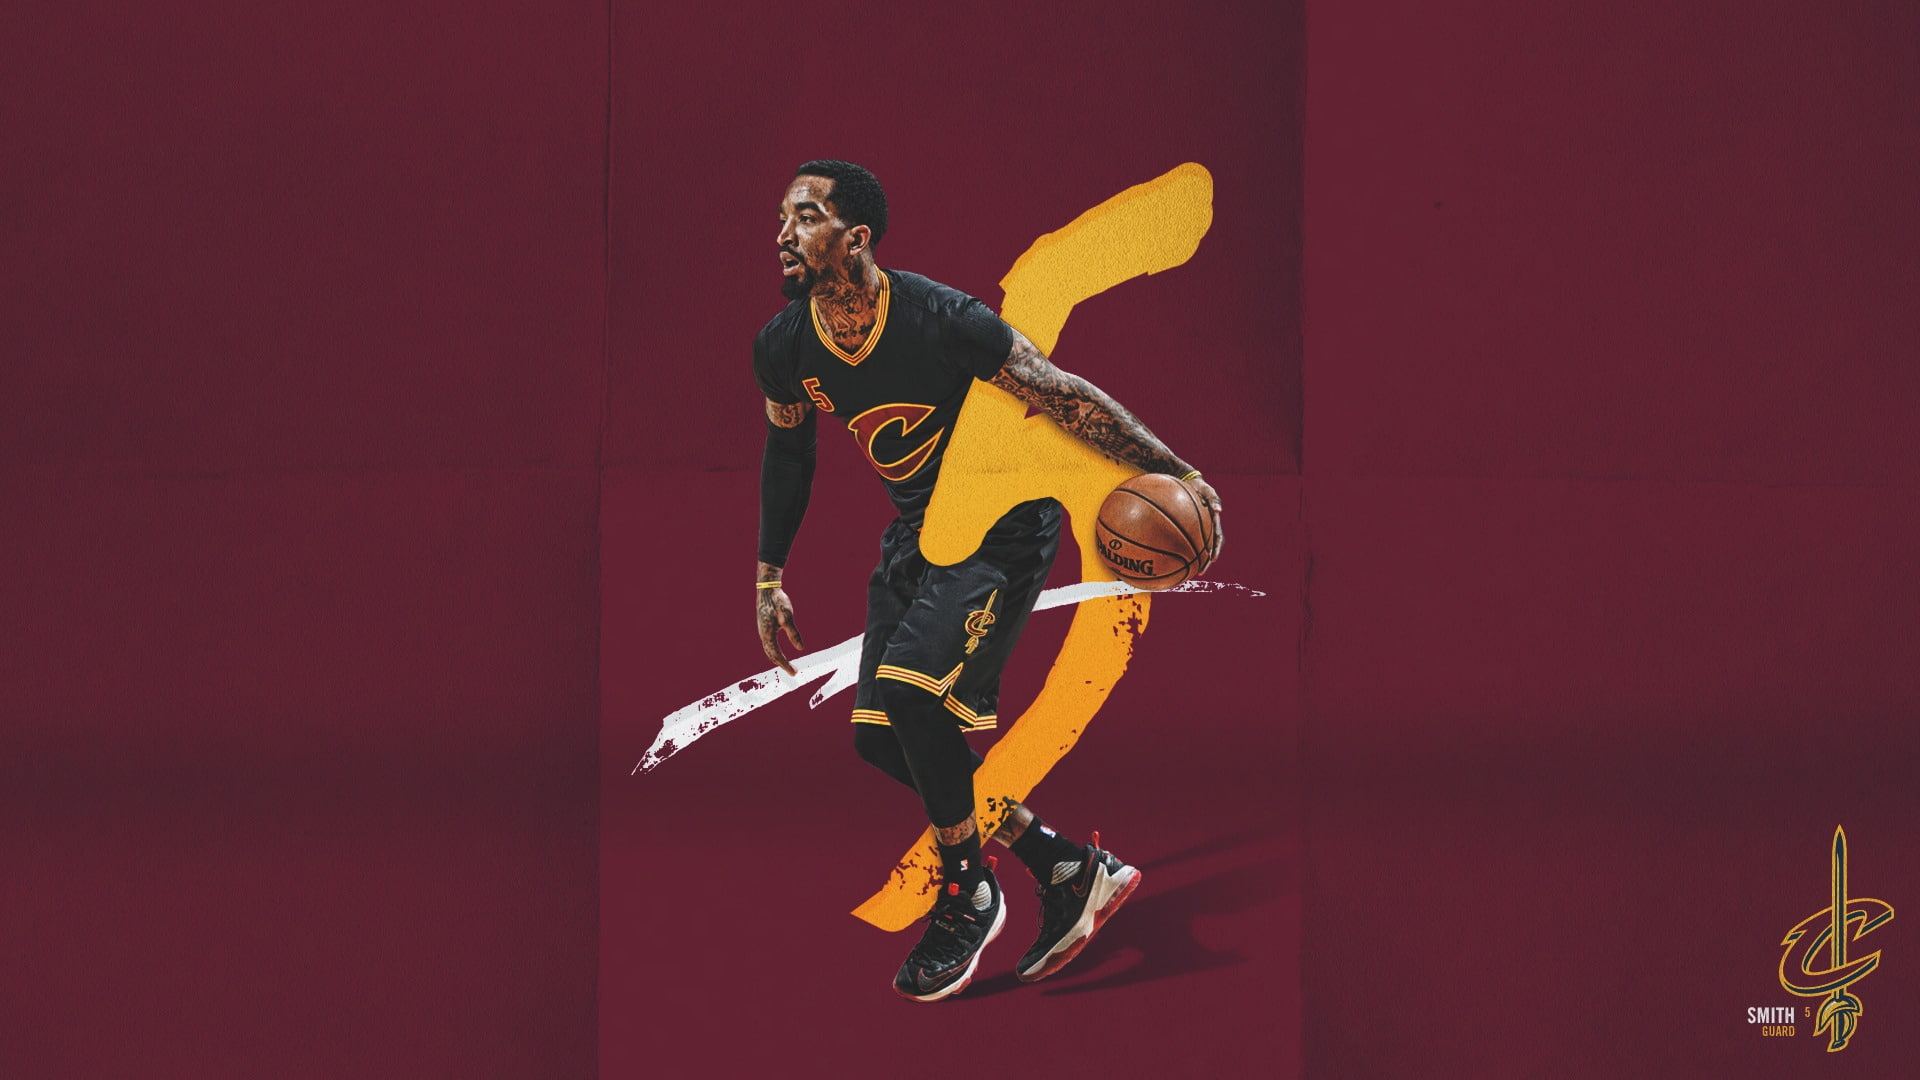 JR Smith NBA 2017 Cleveland Cavaliers Wallpapers, J.R. Smith